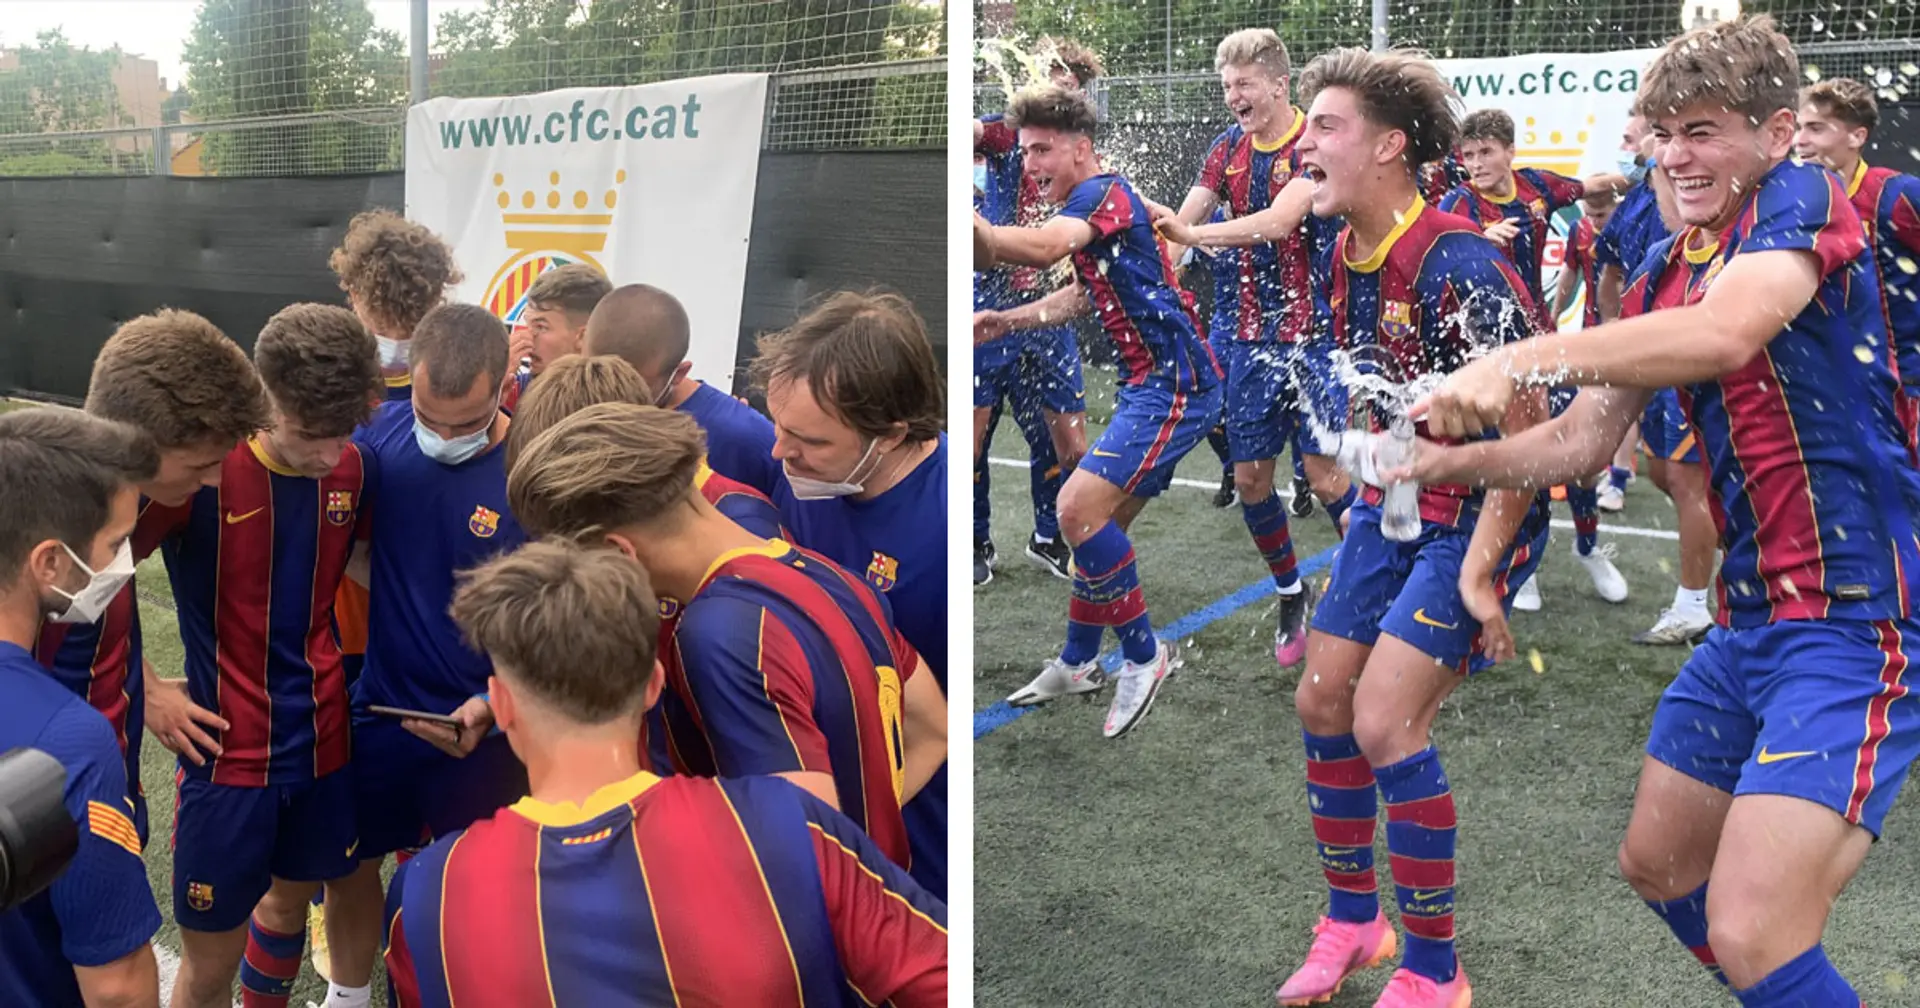 Story of the day: Barca U18 win league title on last day with 14 players missing due to Covid-19, learn news via Internet